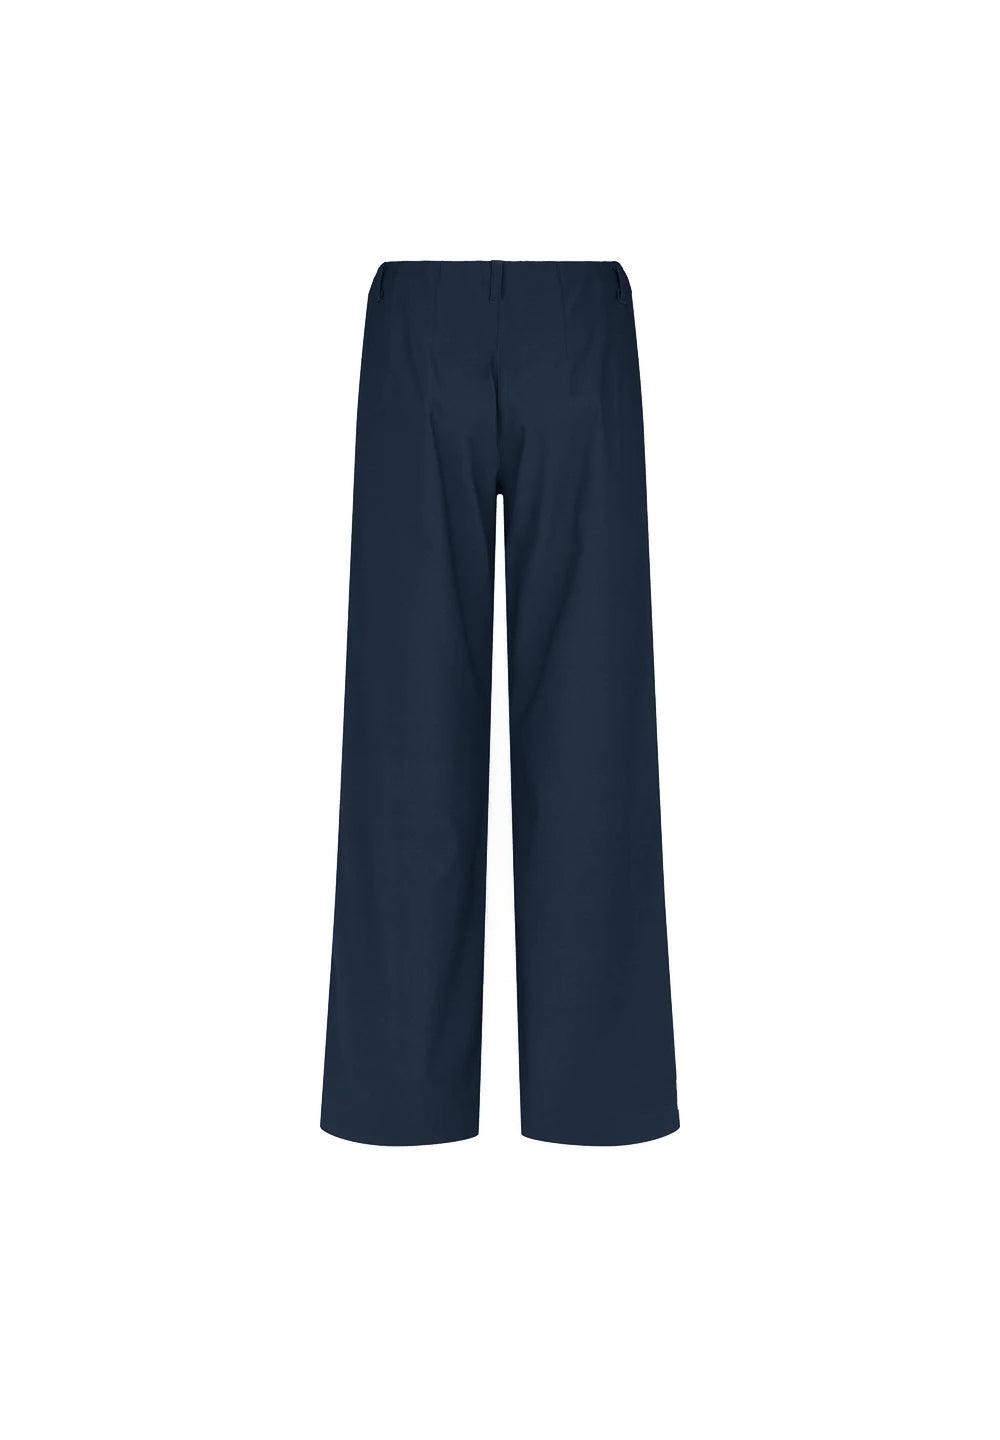 LAURIE  Donna Loose - Medium Length Trousers LOOSE Marine